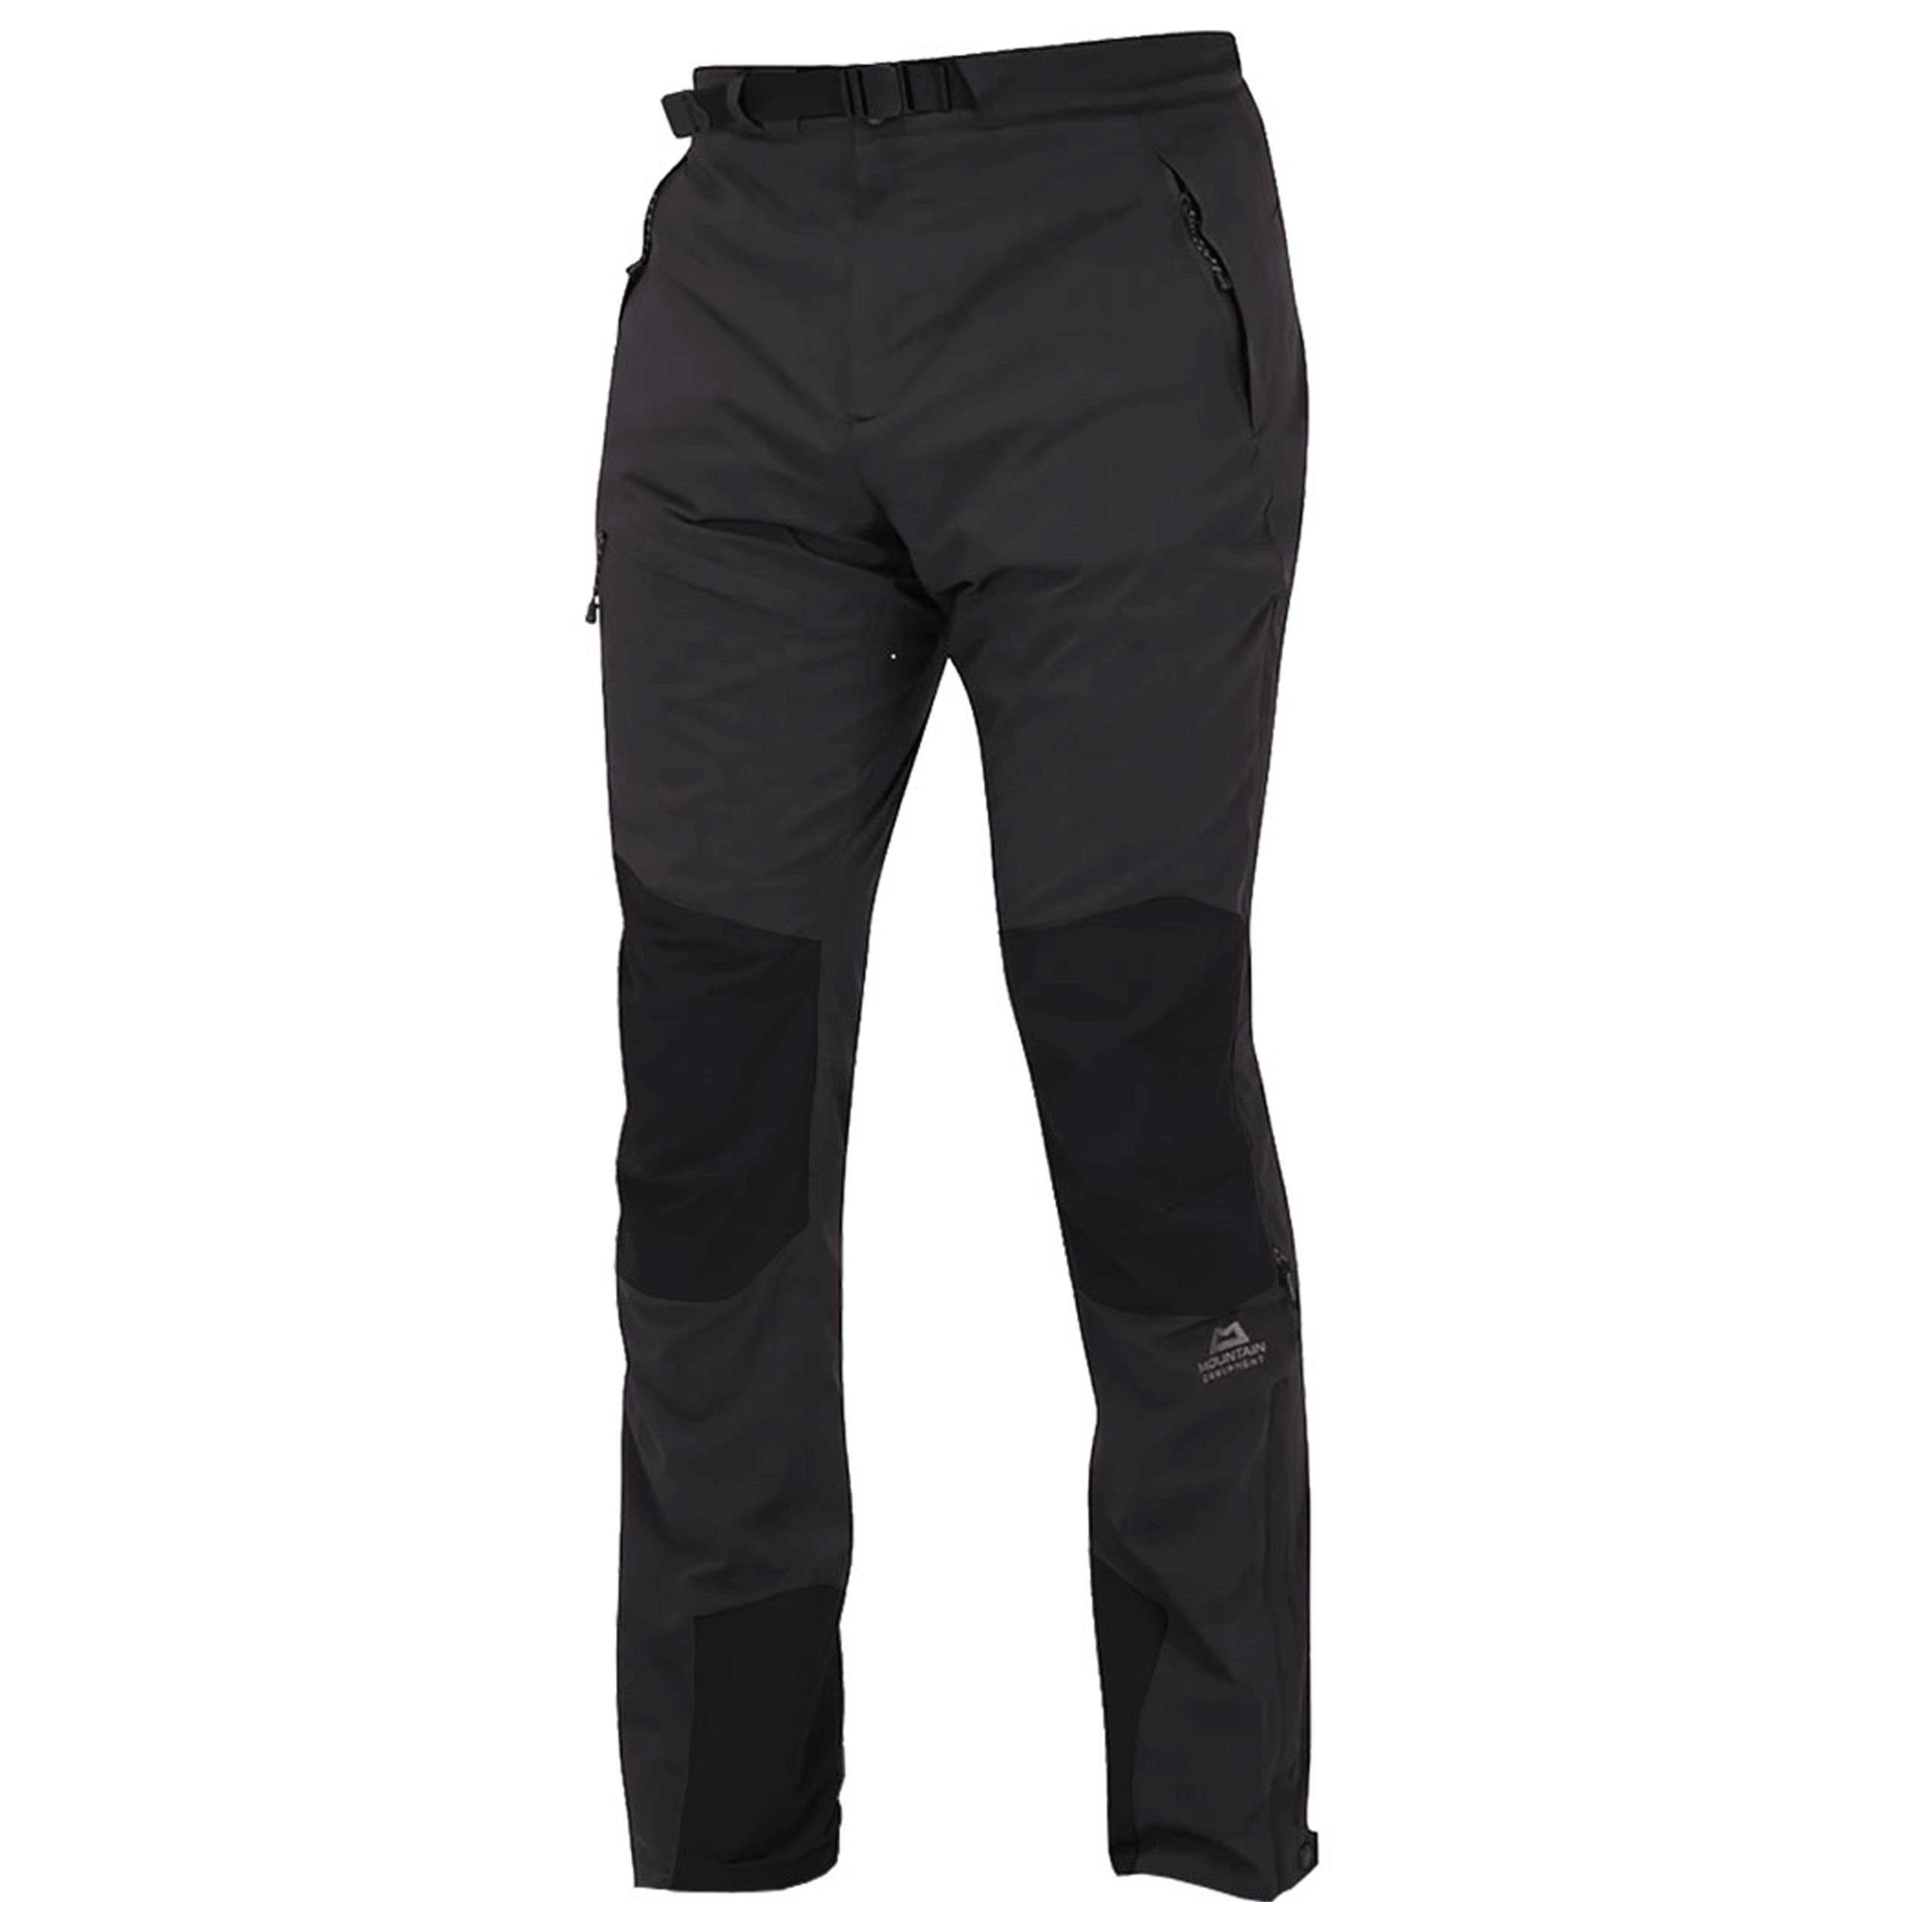 Mountain Equipment Funktionshose Mountain Equipment Kinesis Pant - isolierte Winter Trekkinghose/Thermo